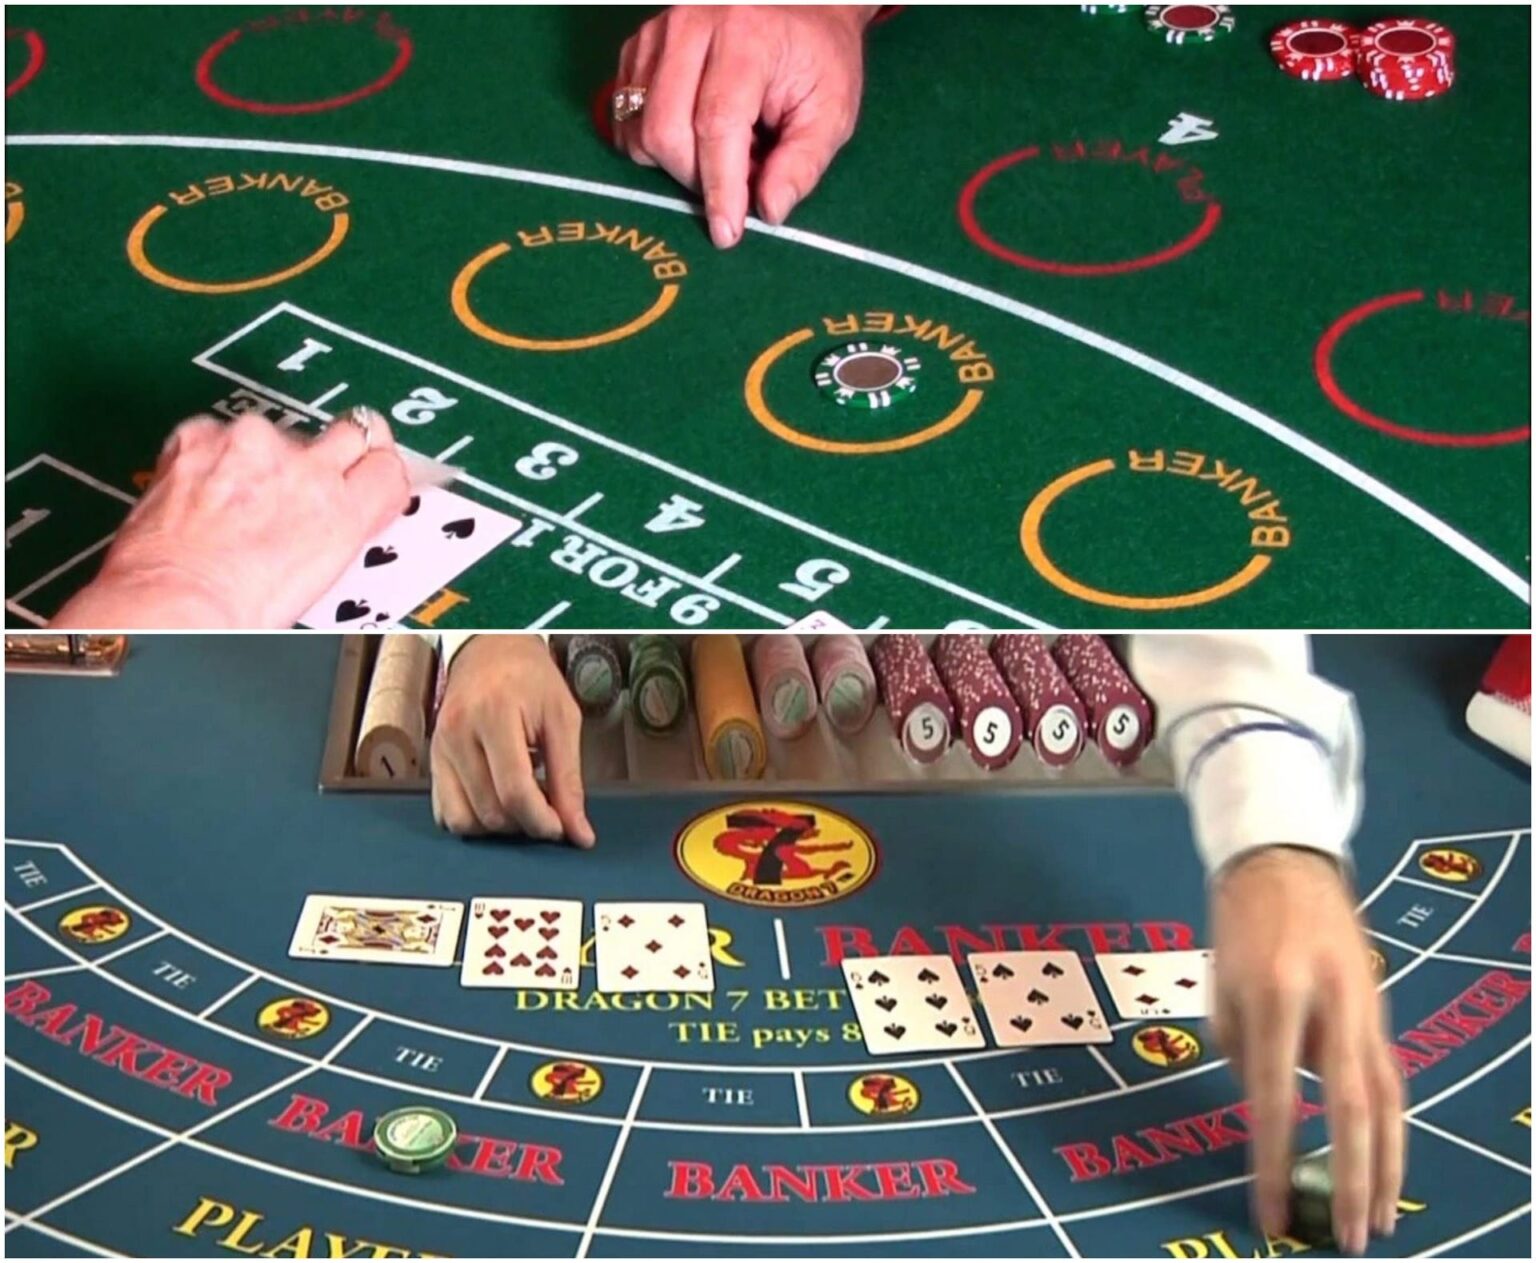 Not sure whether you should try online gambling? Here are some reasons to consider giving it a go with games like baccarat.